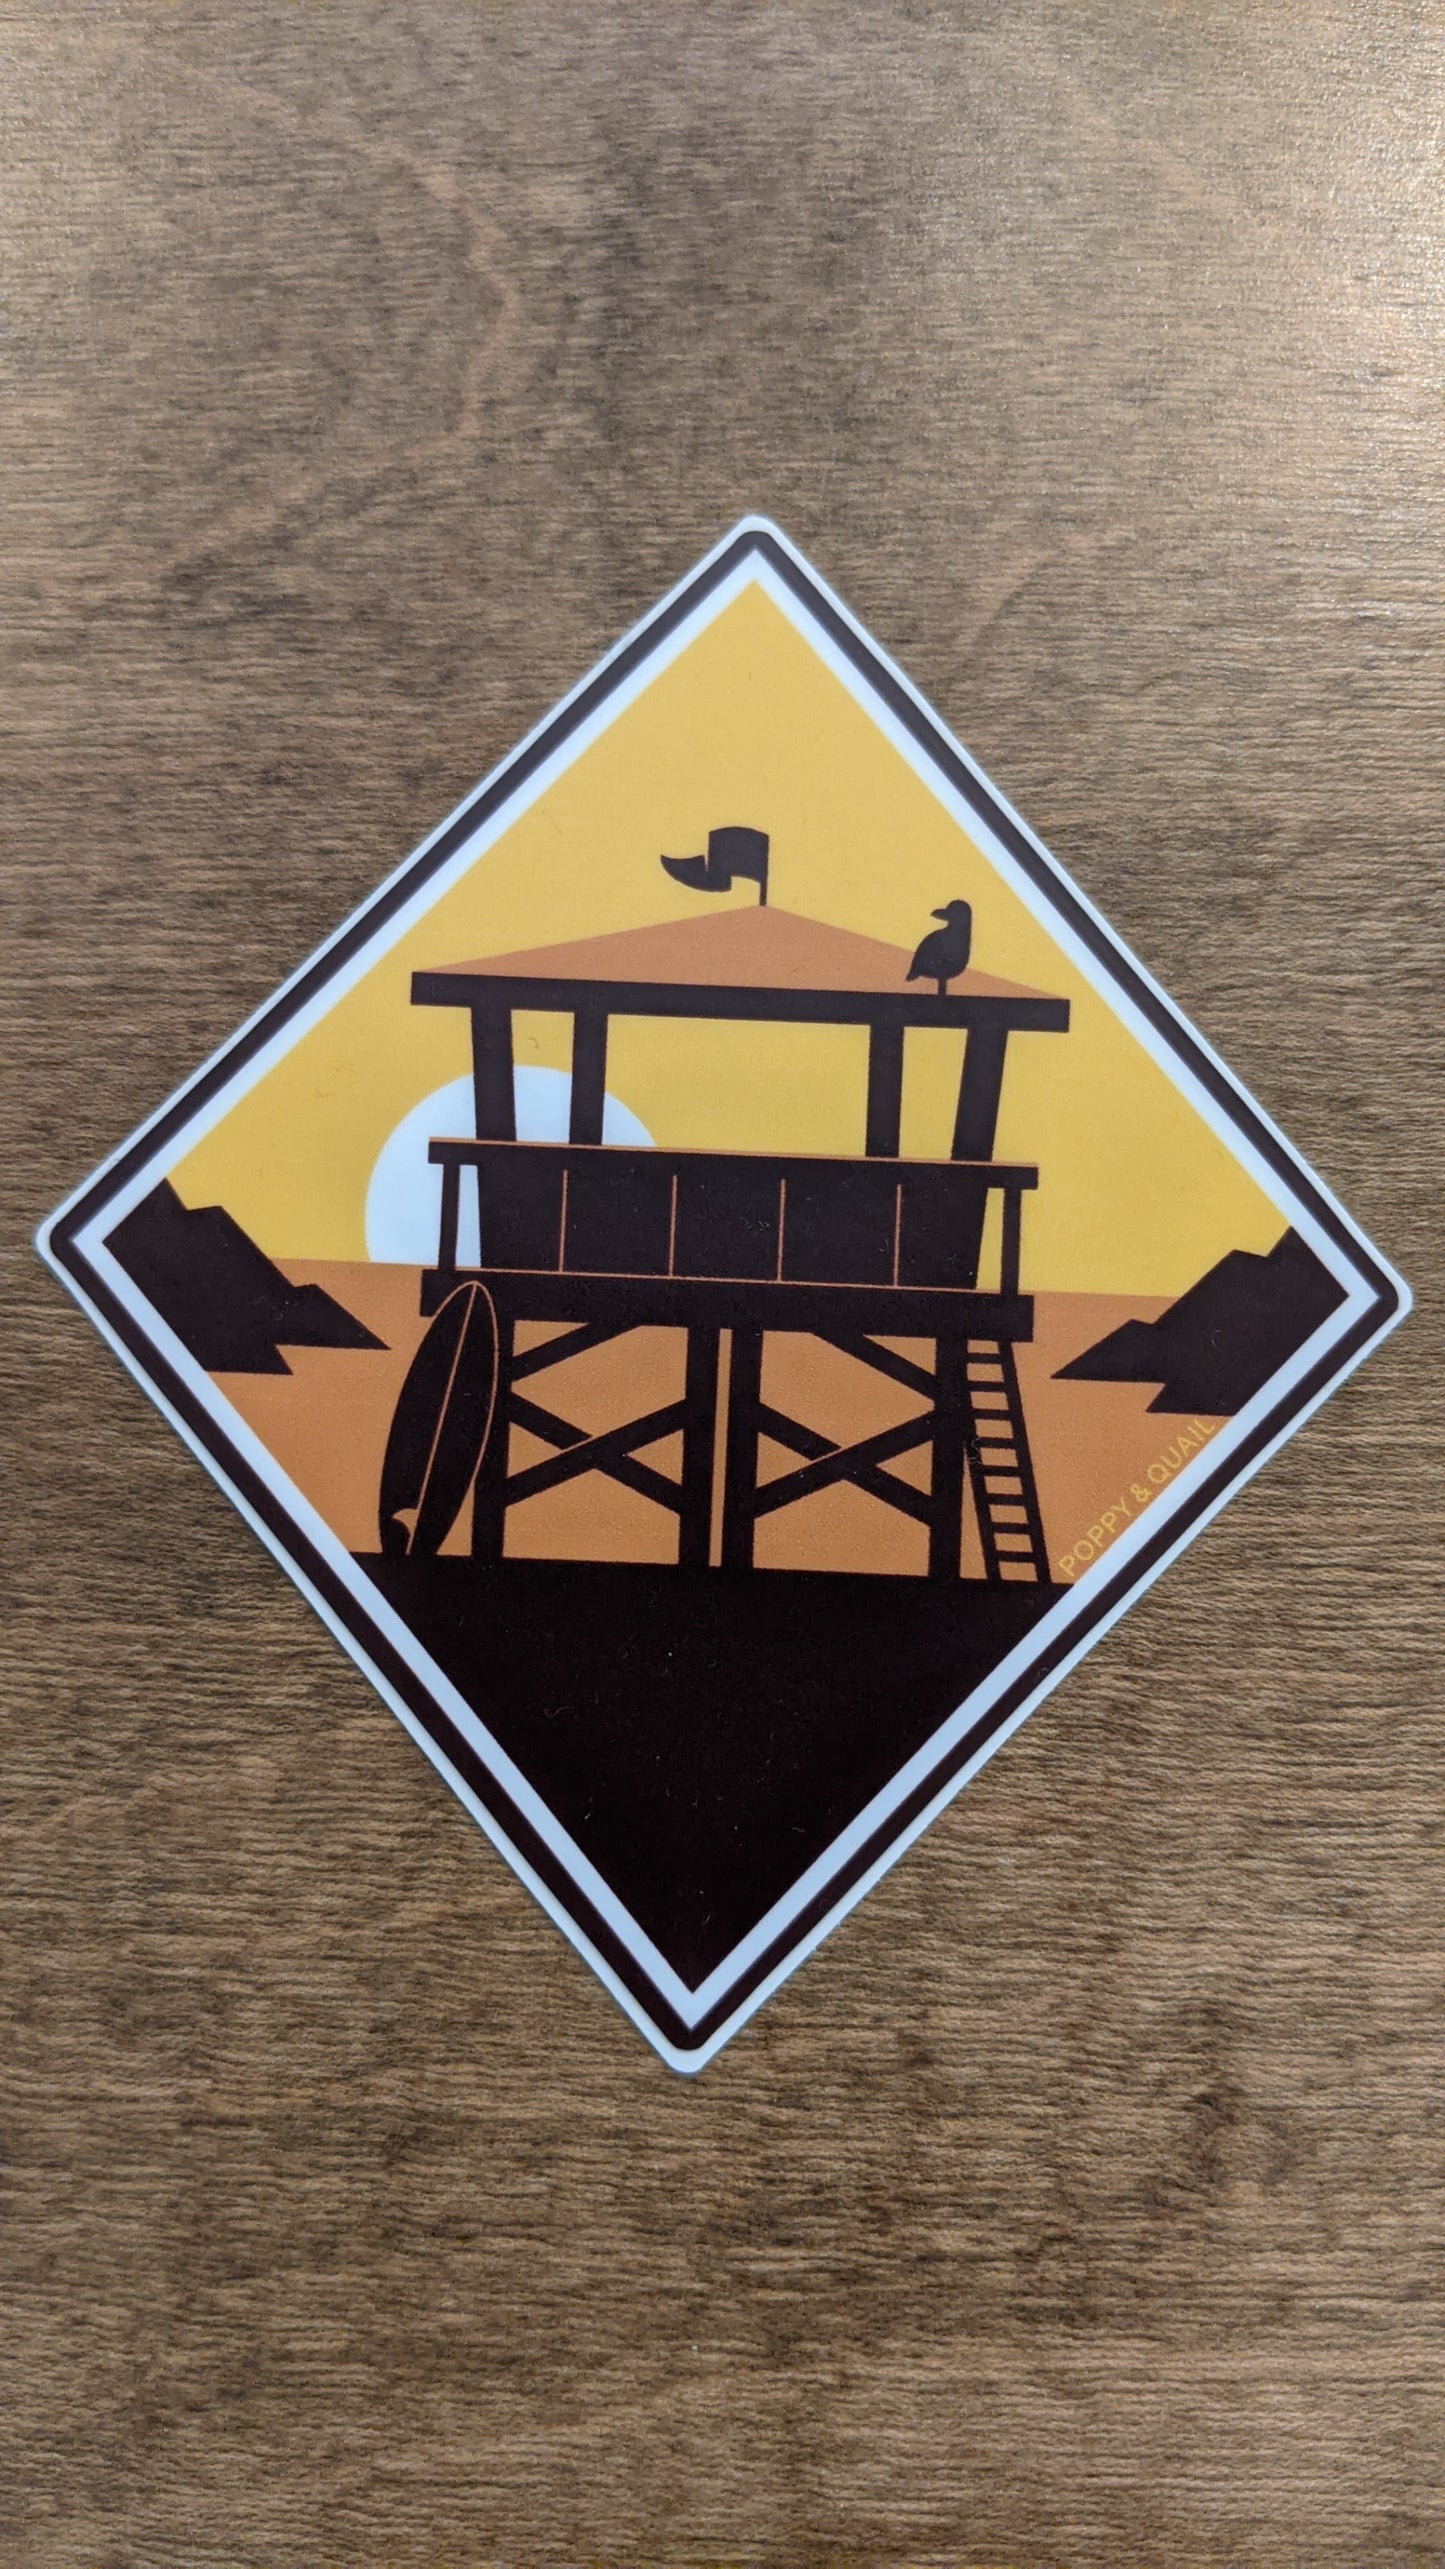 Lookout sticker series by Poppy & Quail in diamond shape with sunset lifeguard stand scene